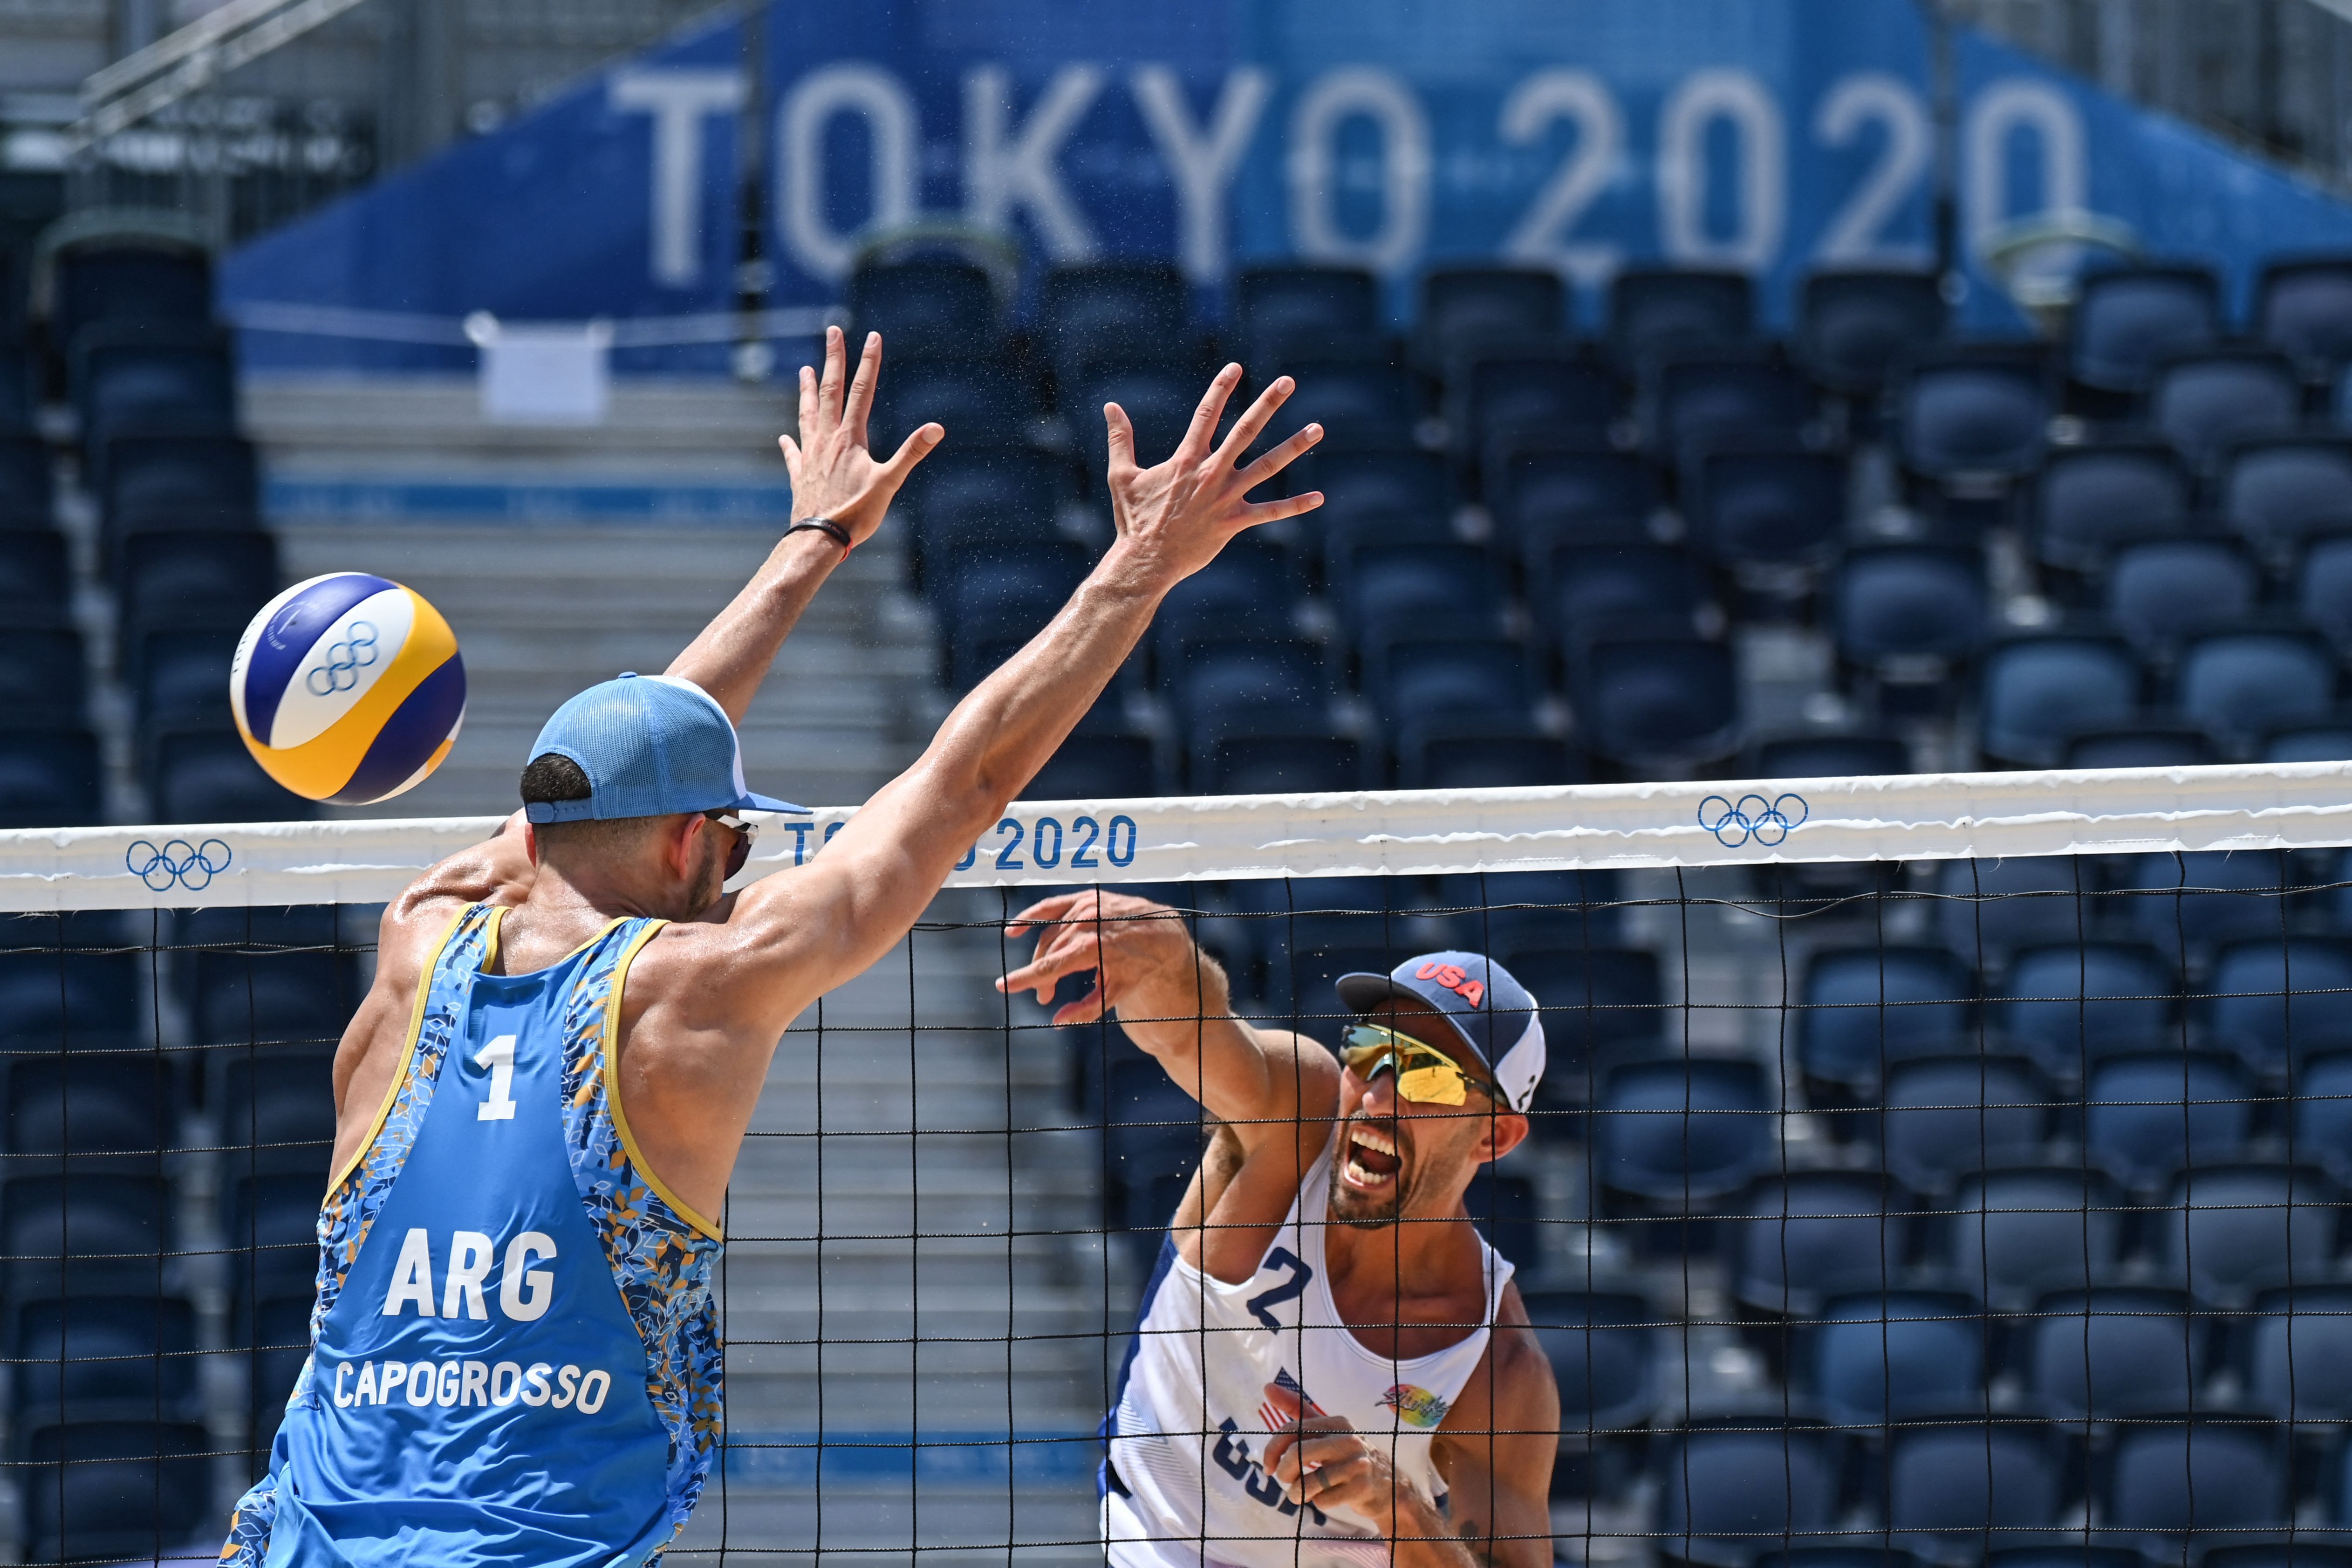 Argentina's Nicolas Capogrosso (L) blocks a shot by USA's Nicholas Lucena in their men's beach volleyball match between the USA and Argentina in Tokyo on July 29